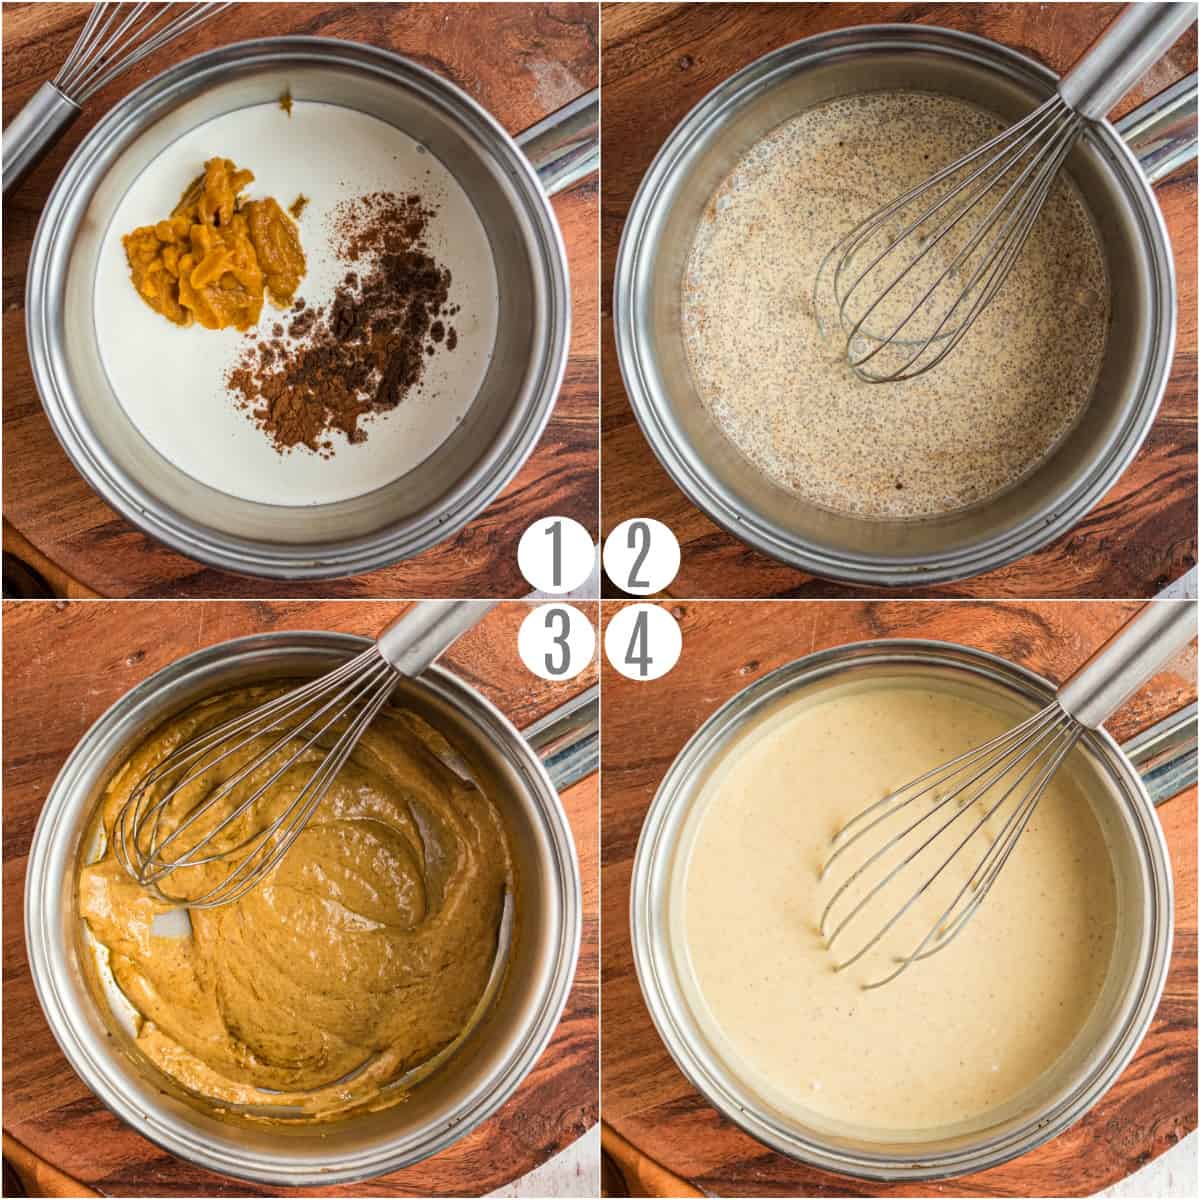 Step by step photos showing how to make pumpkin spice coffee creamer.